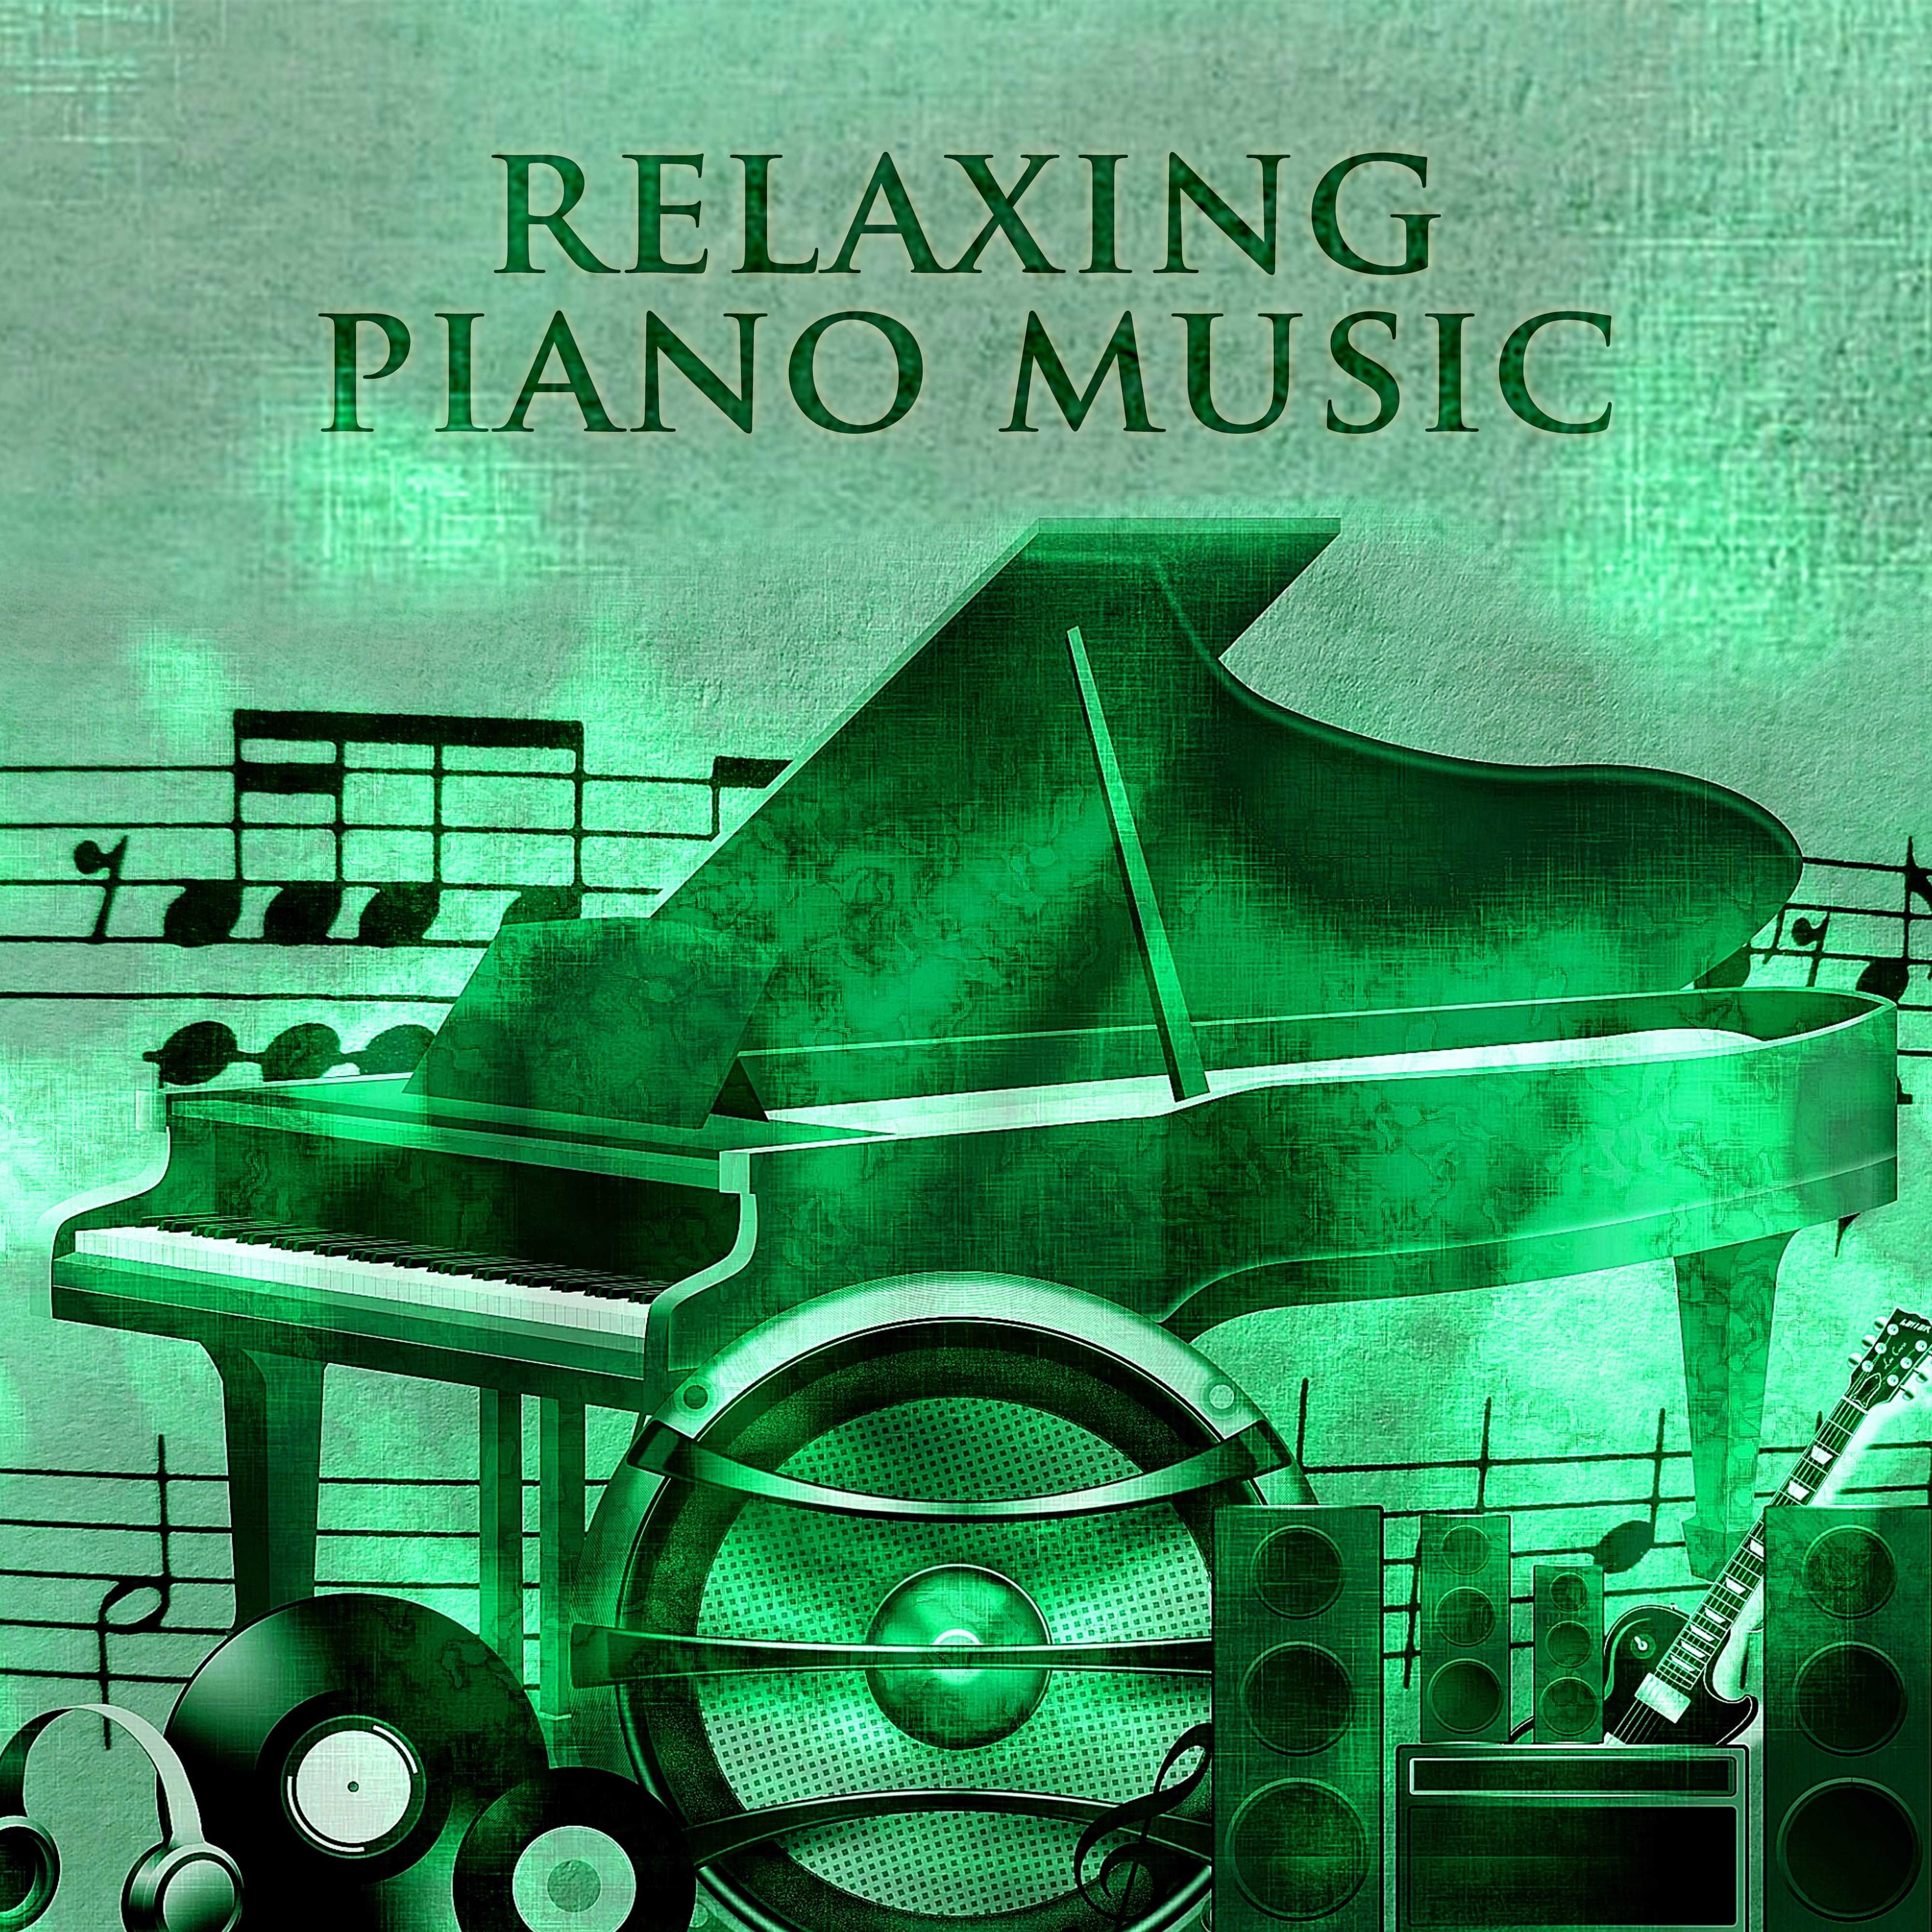 Relaxing Piano Music - Mind Body Relaxation, Luxury Spa Lounge, Paradise in the Home Spa, Nature Music for Healing Through Sound and Touch